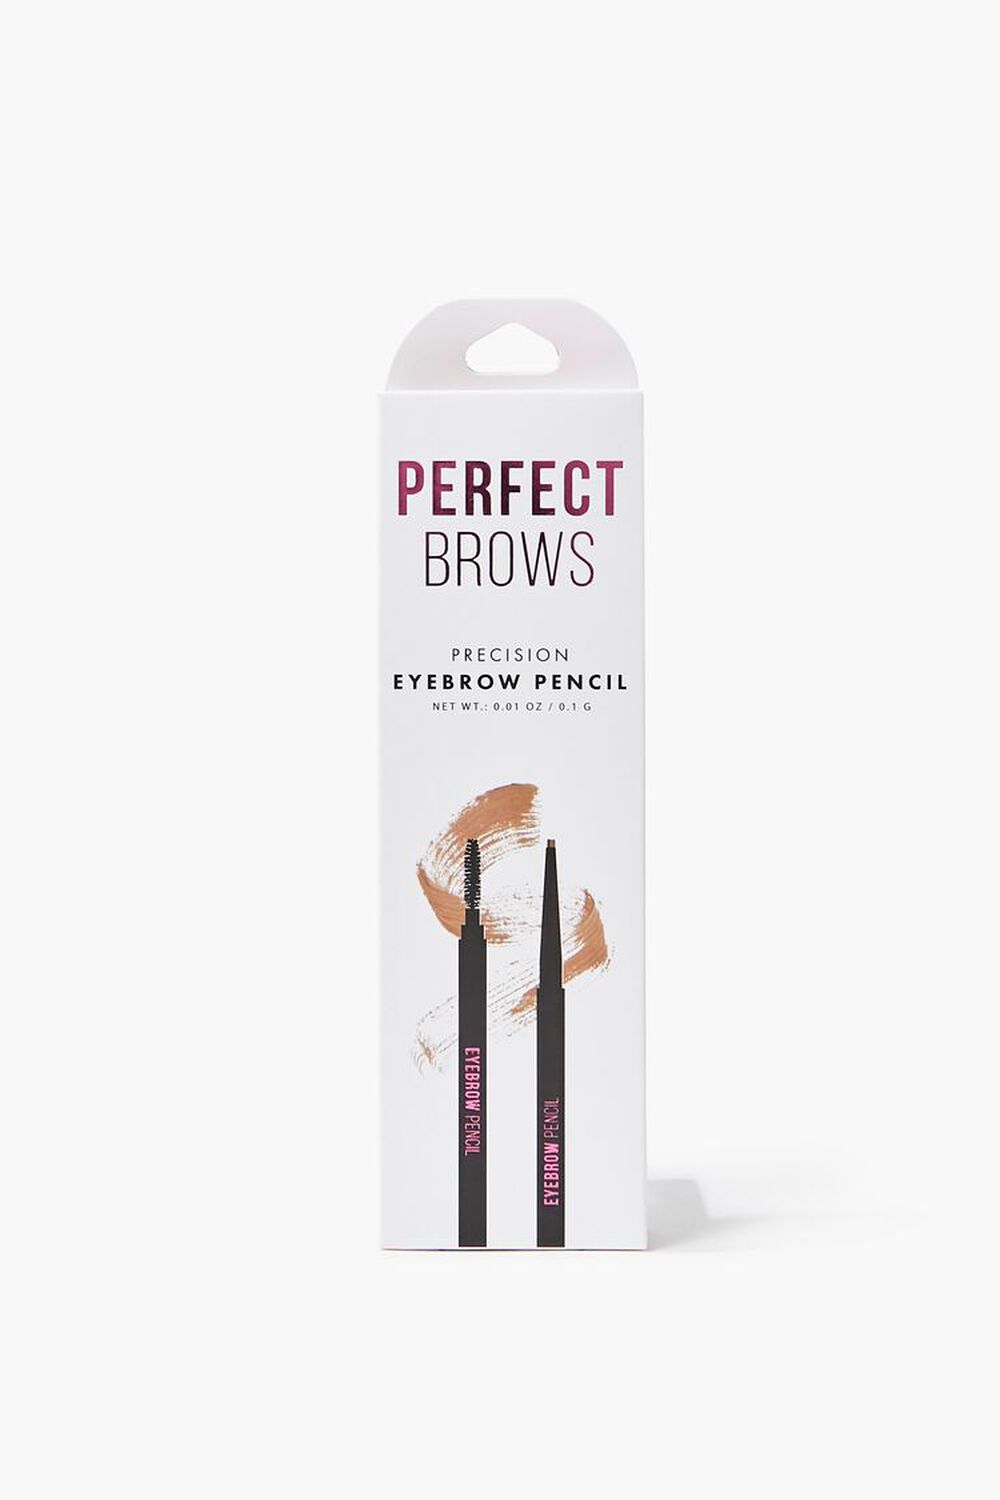 BLONDE Perfect Brows Eyebrow Pencil, image 1